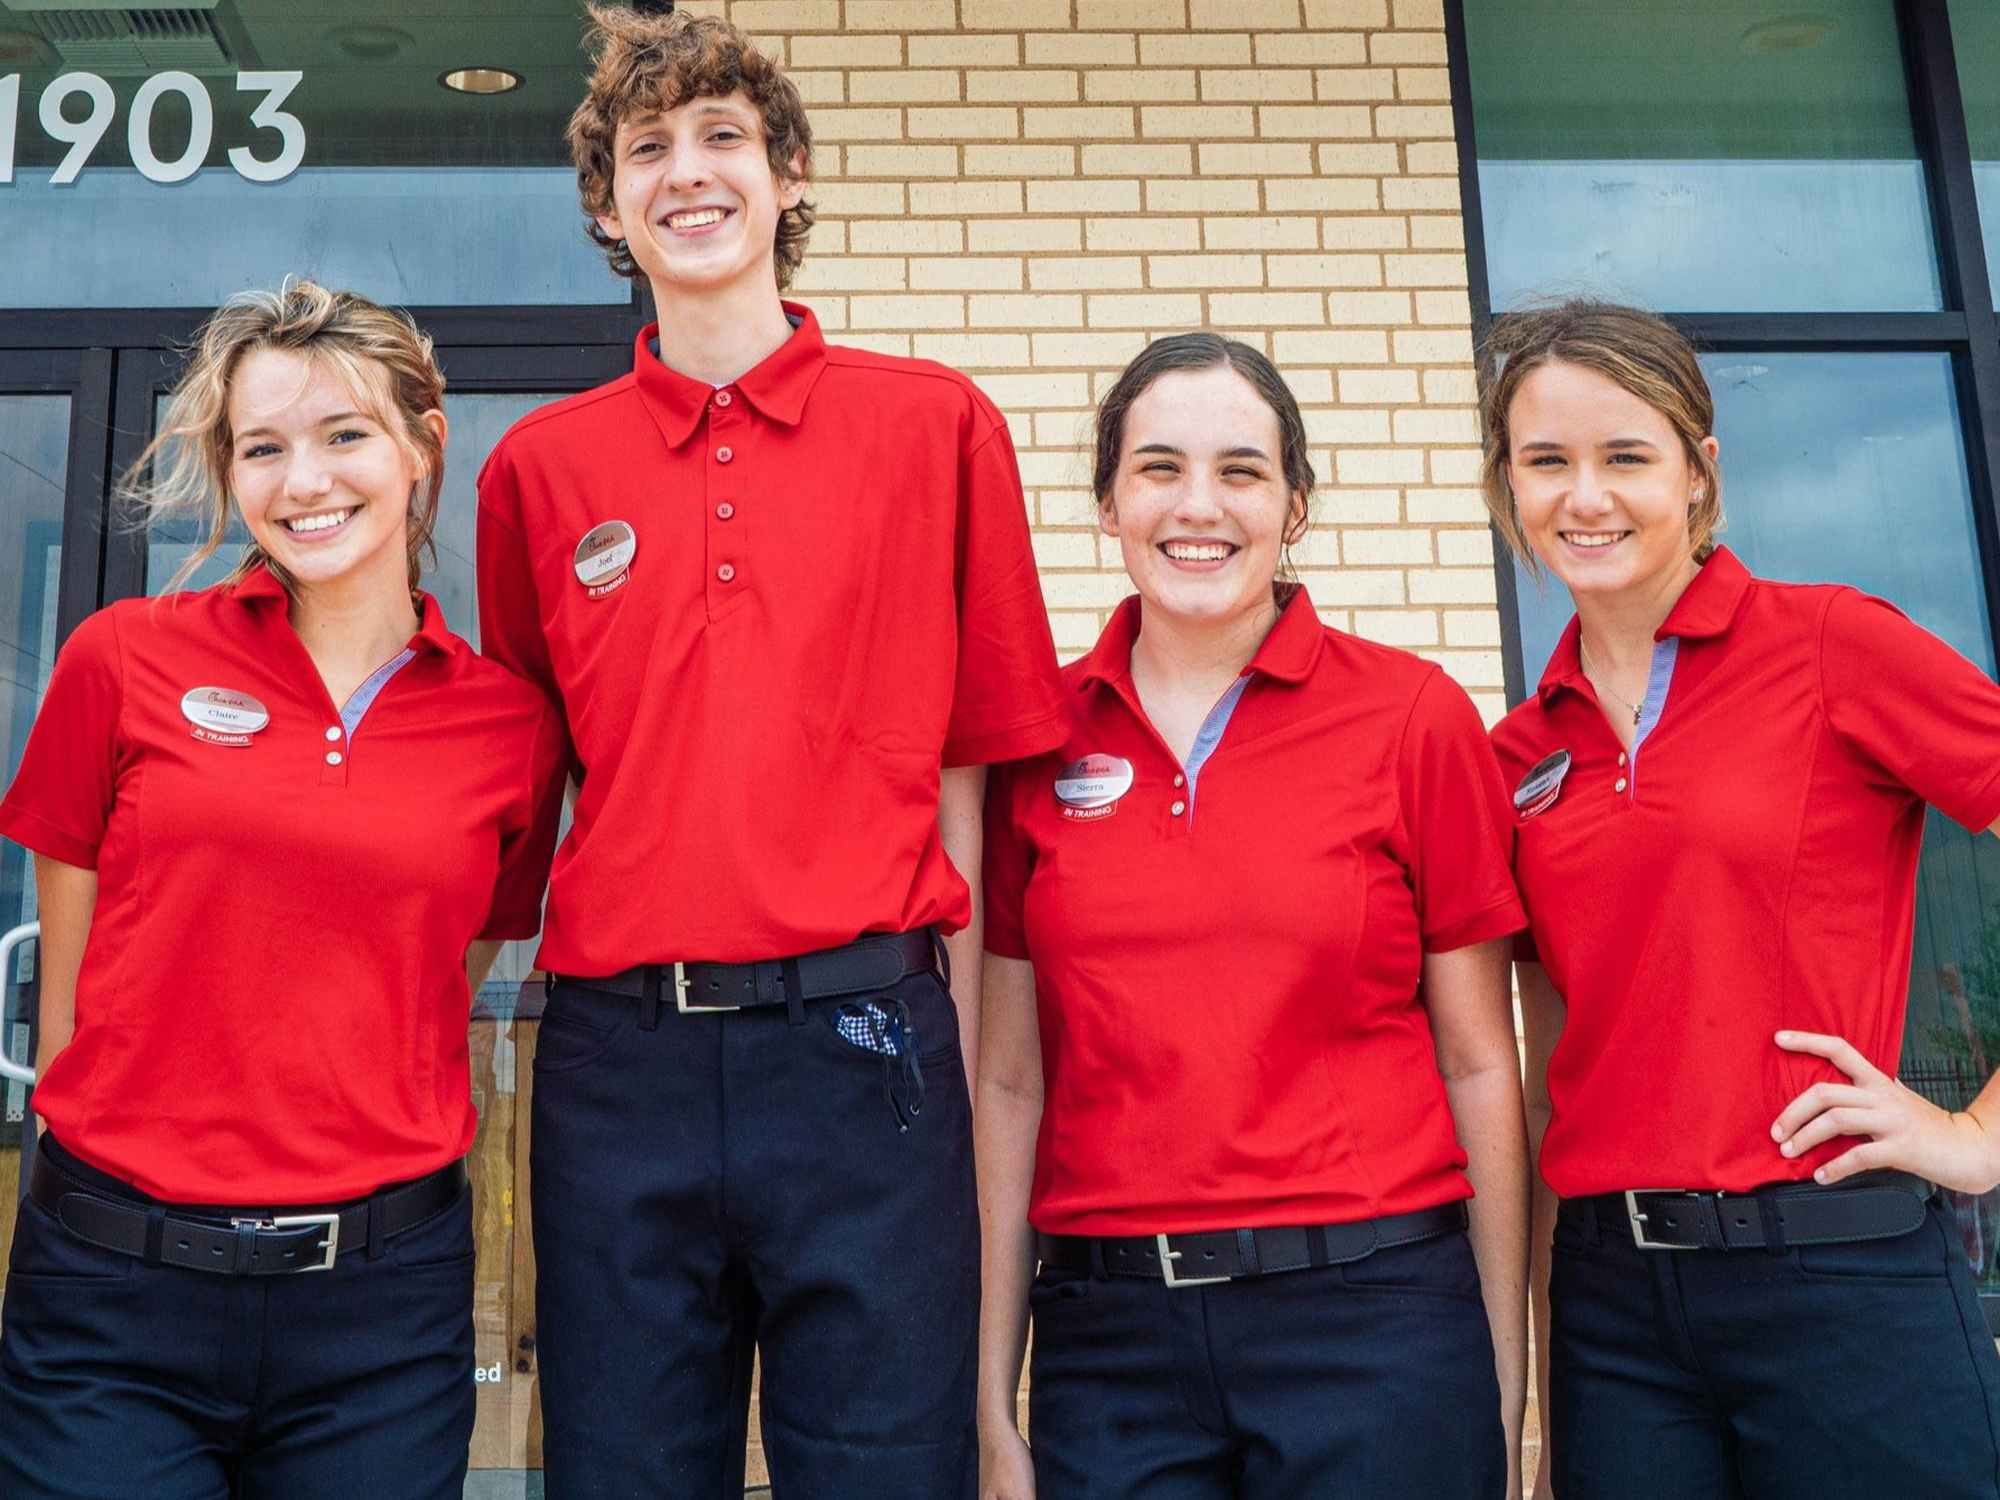 chick fil a team members standing together while smiling 